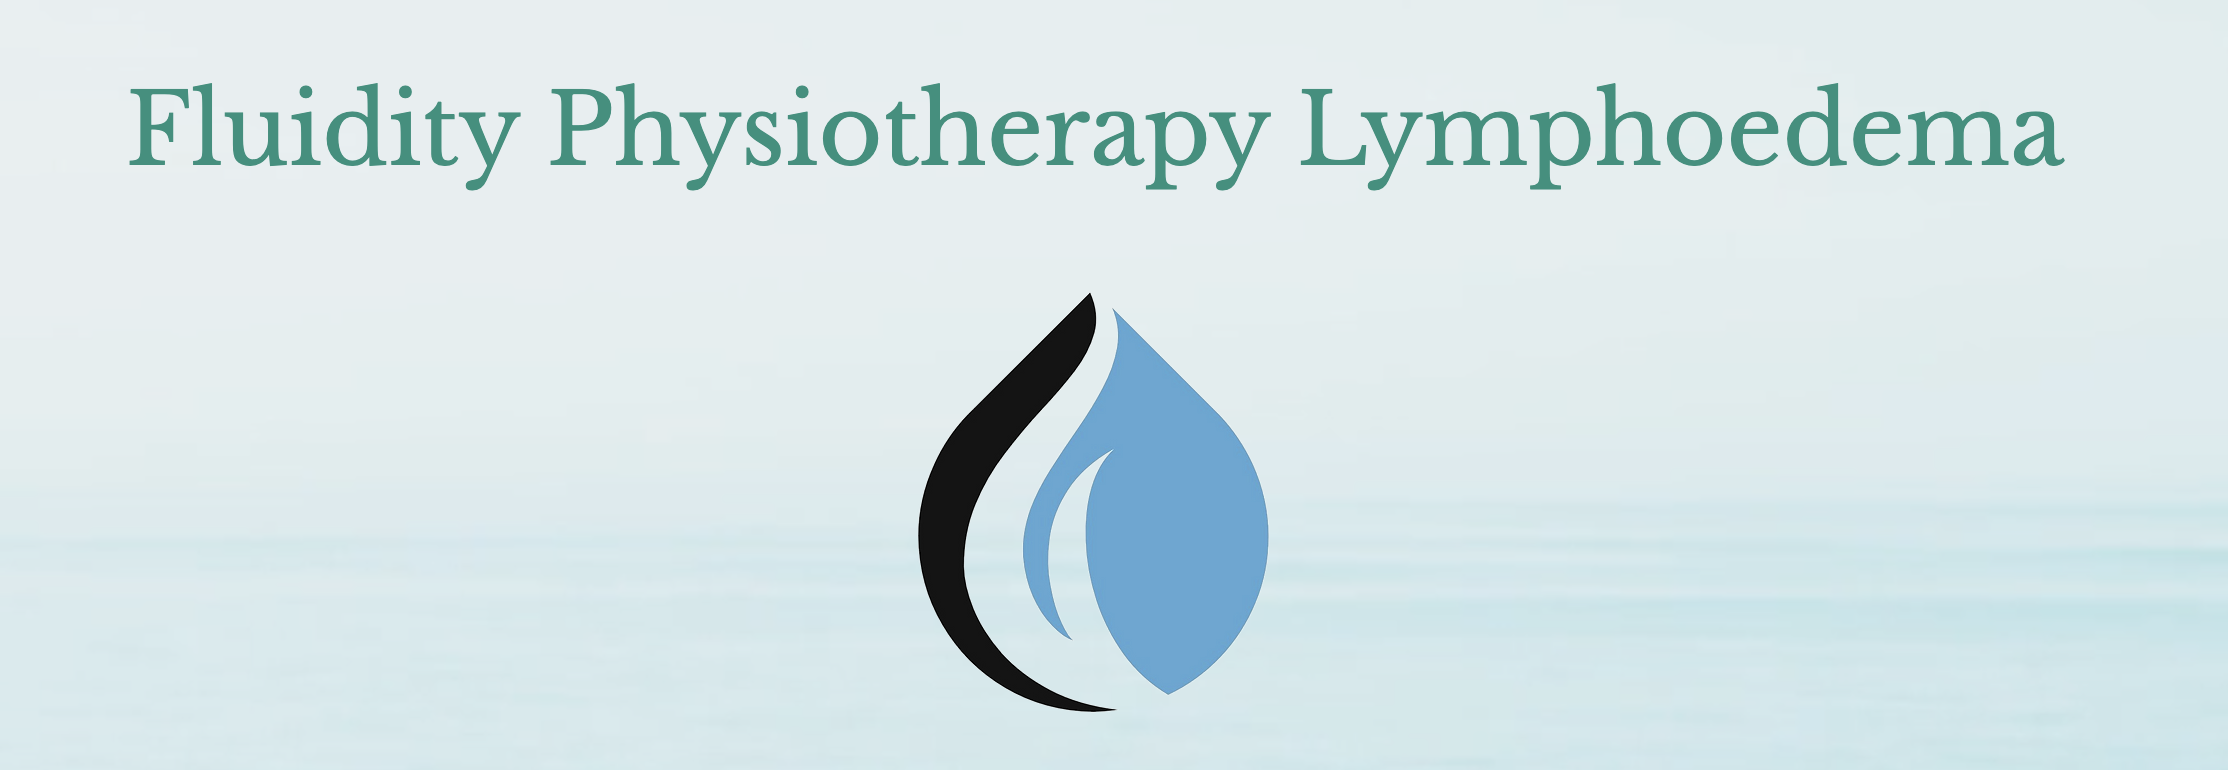 Fluidity Physiotherapy Lymphoedema